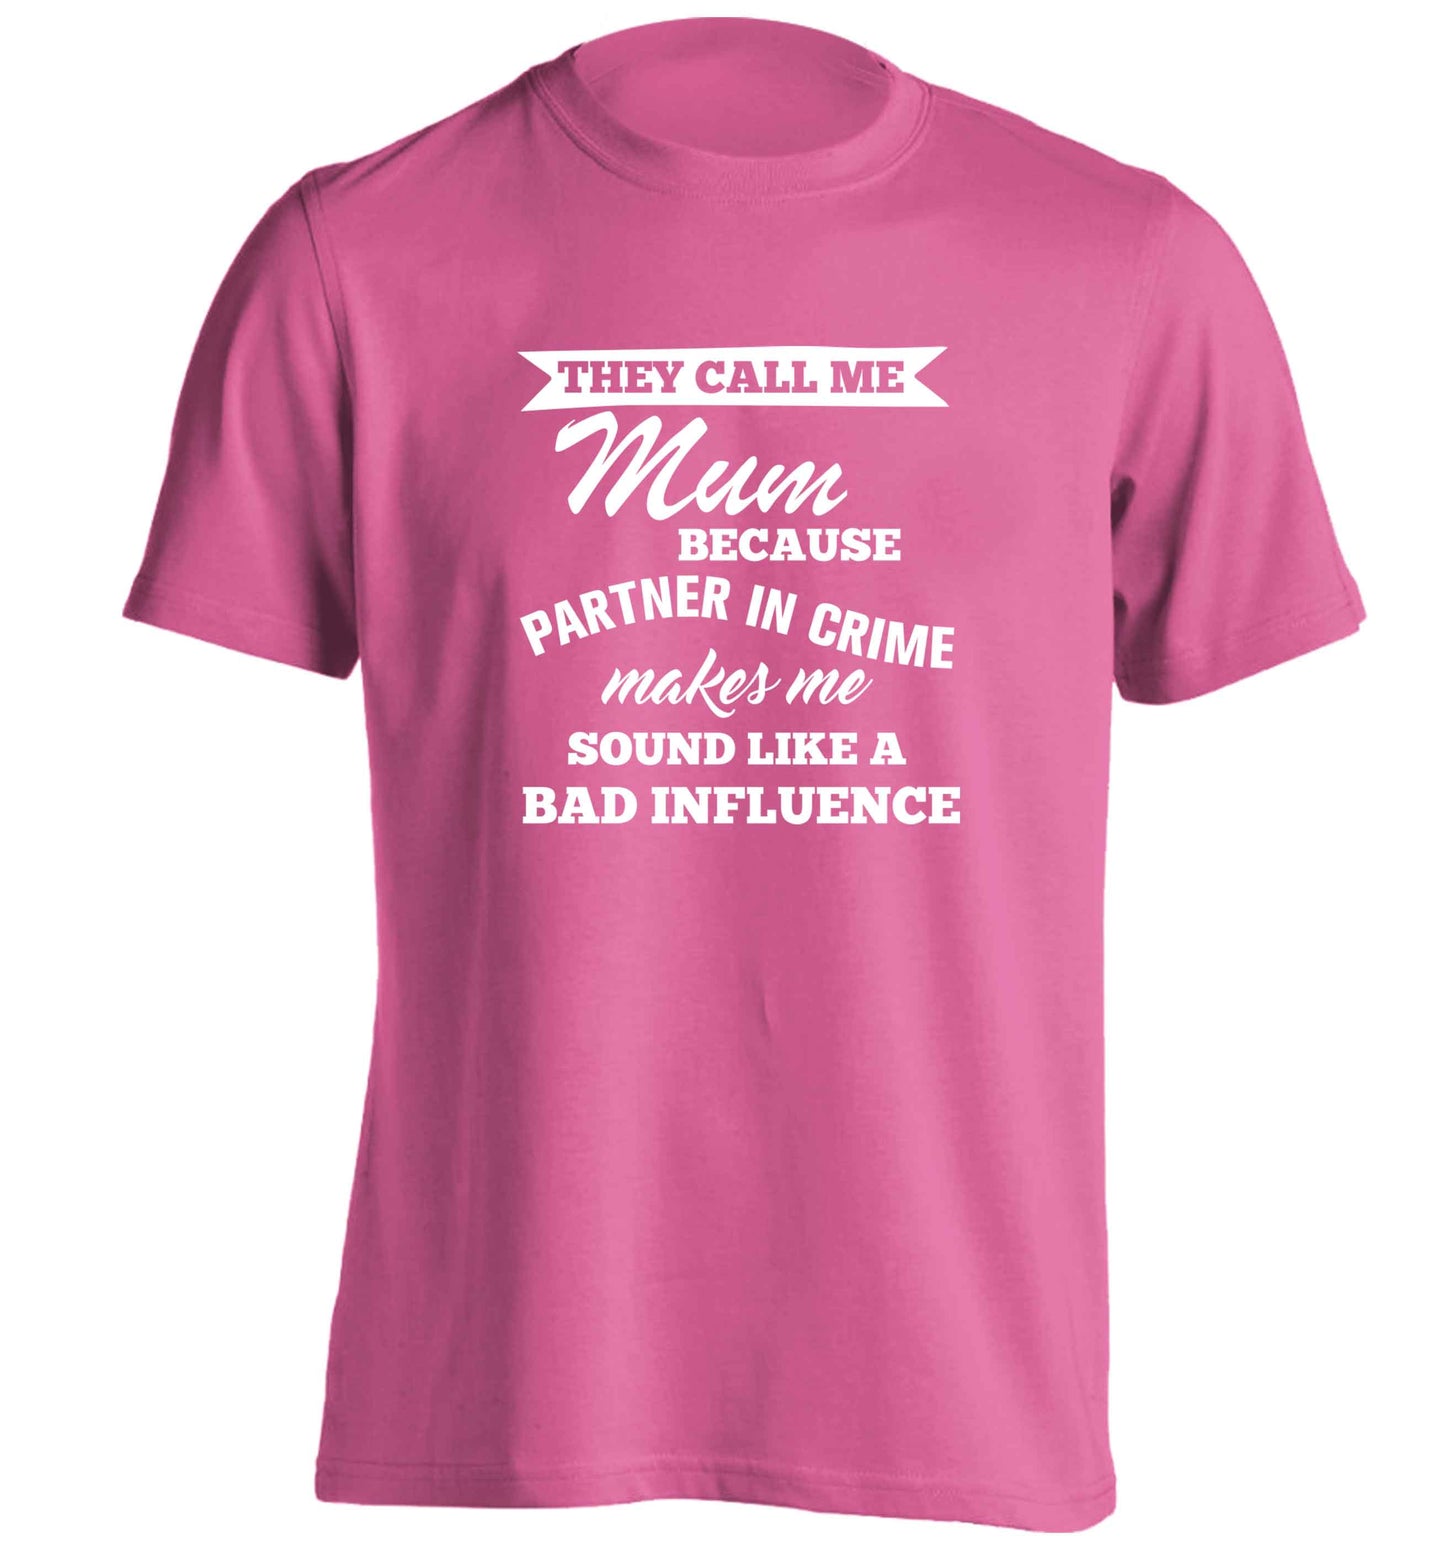 They call me mum because partner in crime makes me sound like a bad influence adults unisex pink Tshirt 2XL